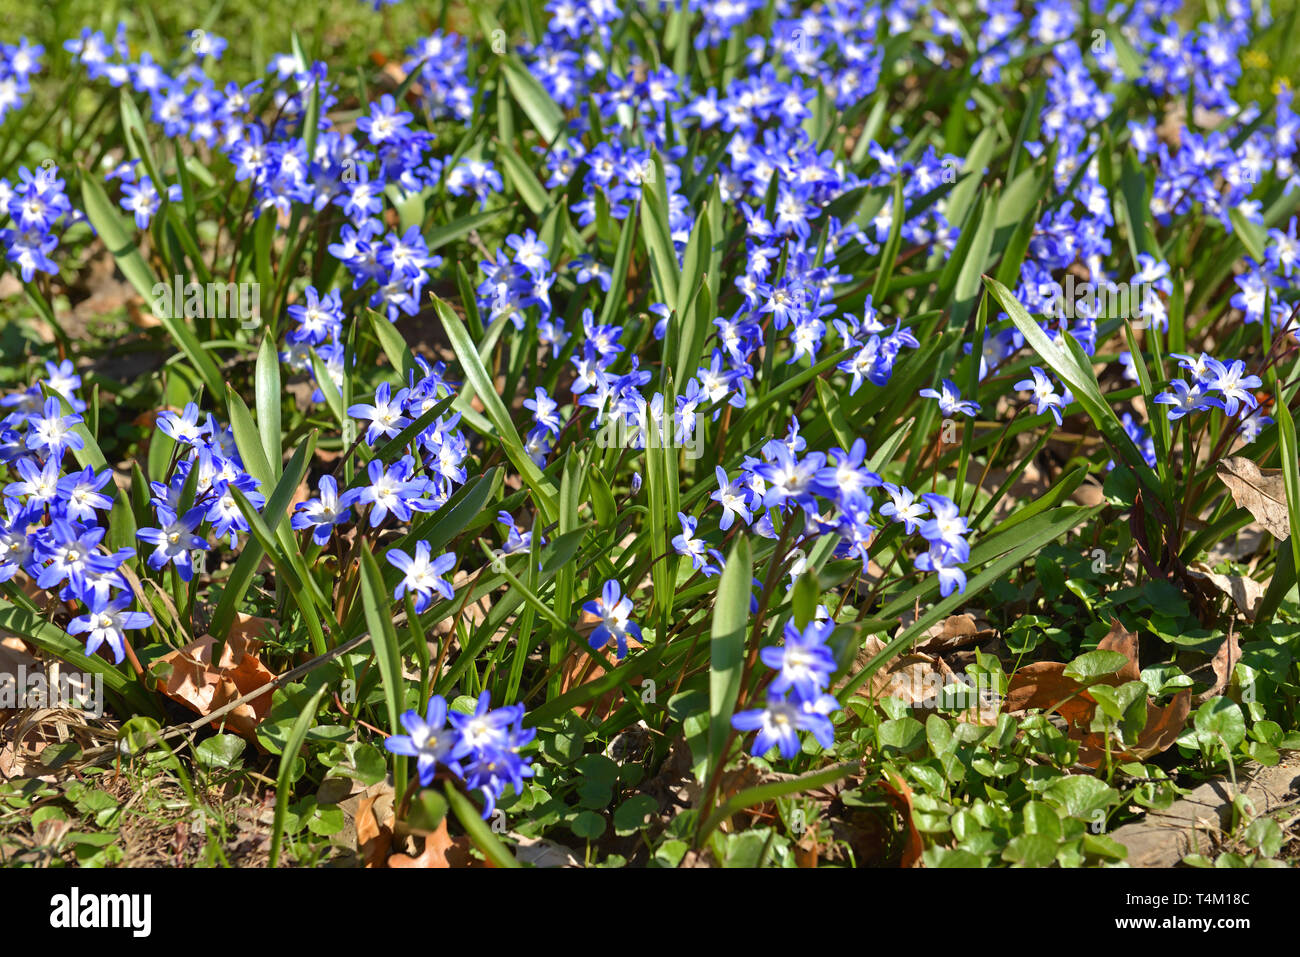 Chionodoxa forbesii or Forbes' glory-of-the-snow, bulbous perennial from south-west Turkey flowering in April. Russia Stock Photo